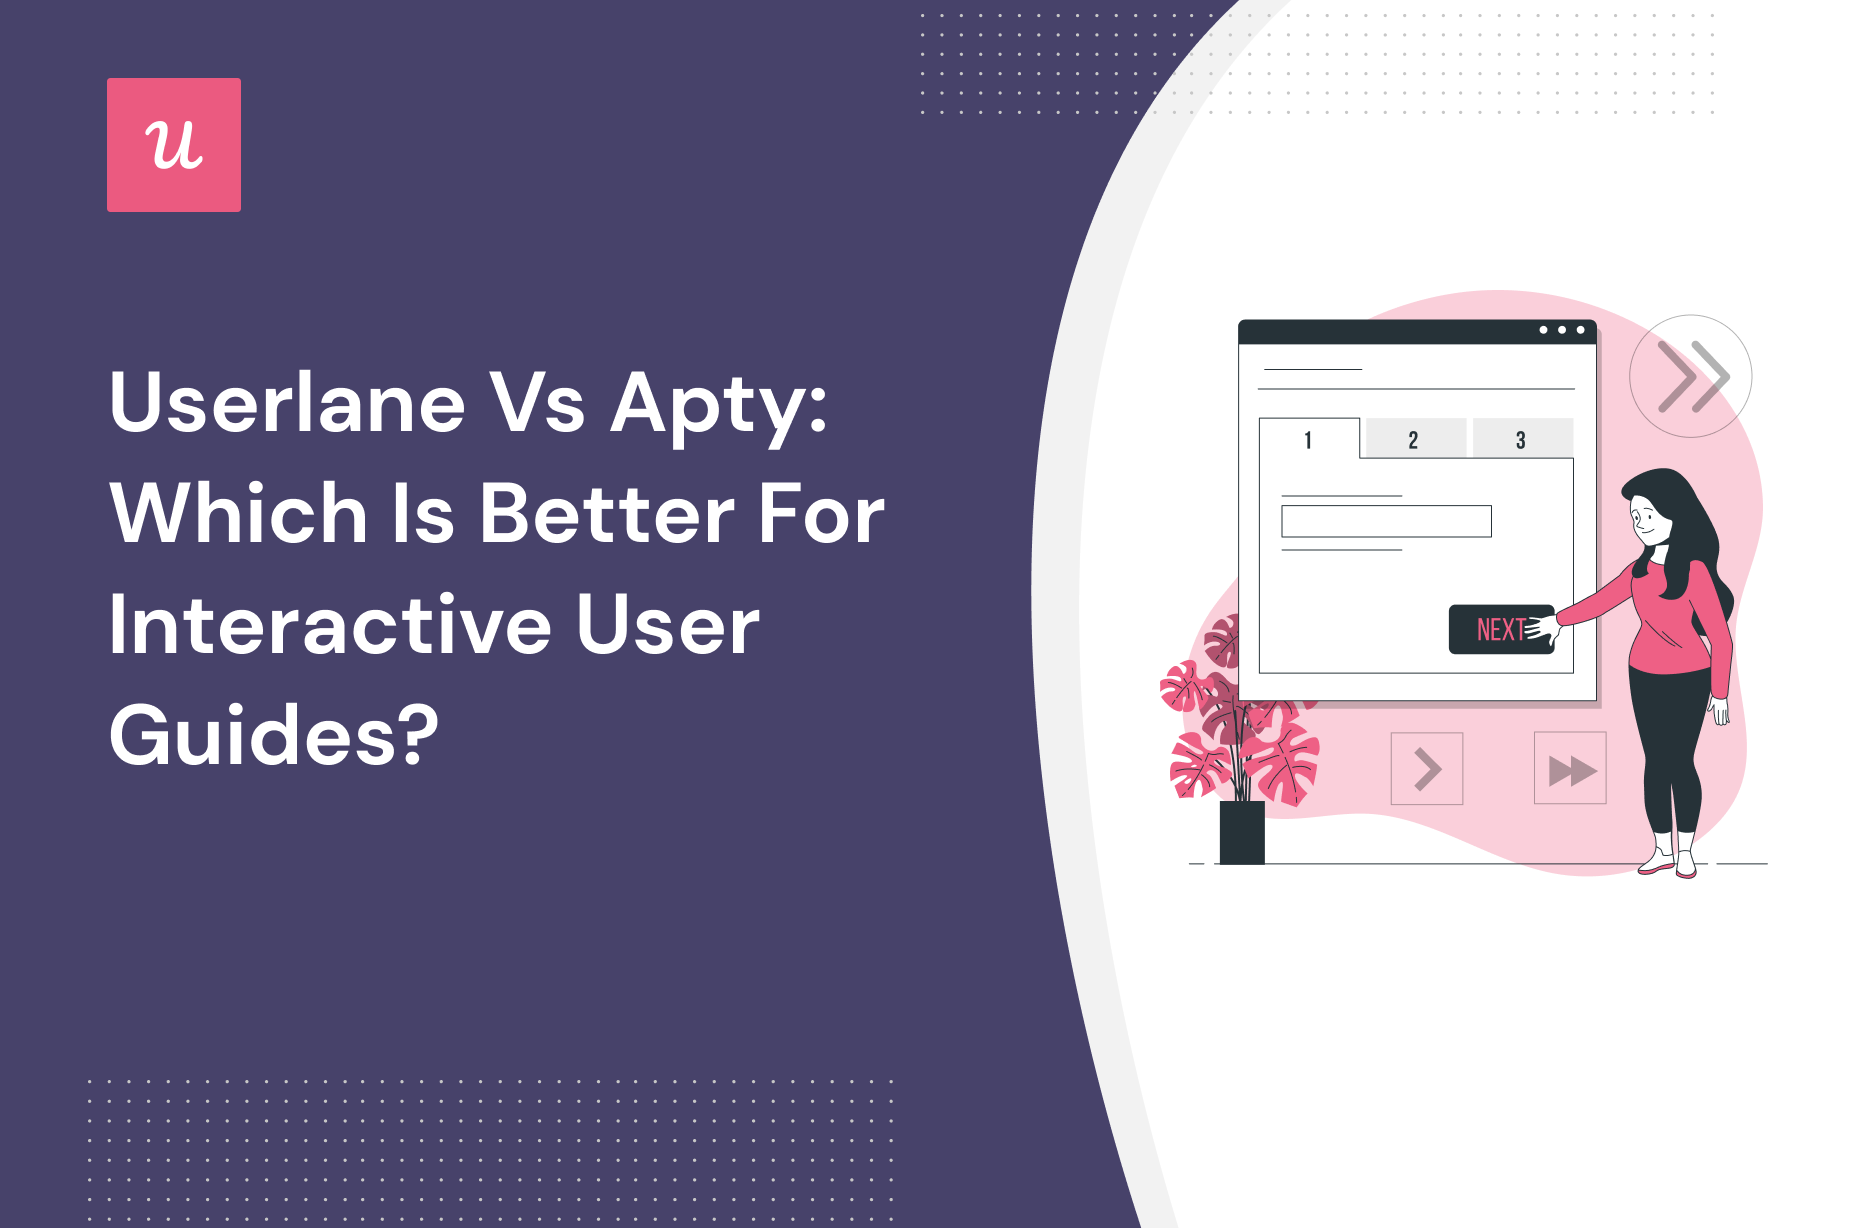 Userlane vs Apty: Which is Better for Interactive User Guides?